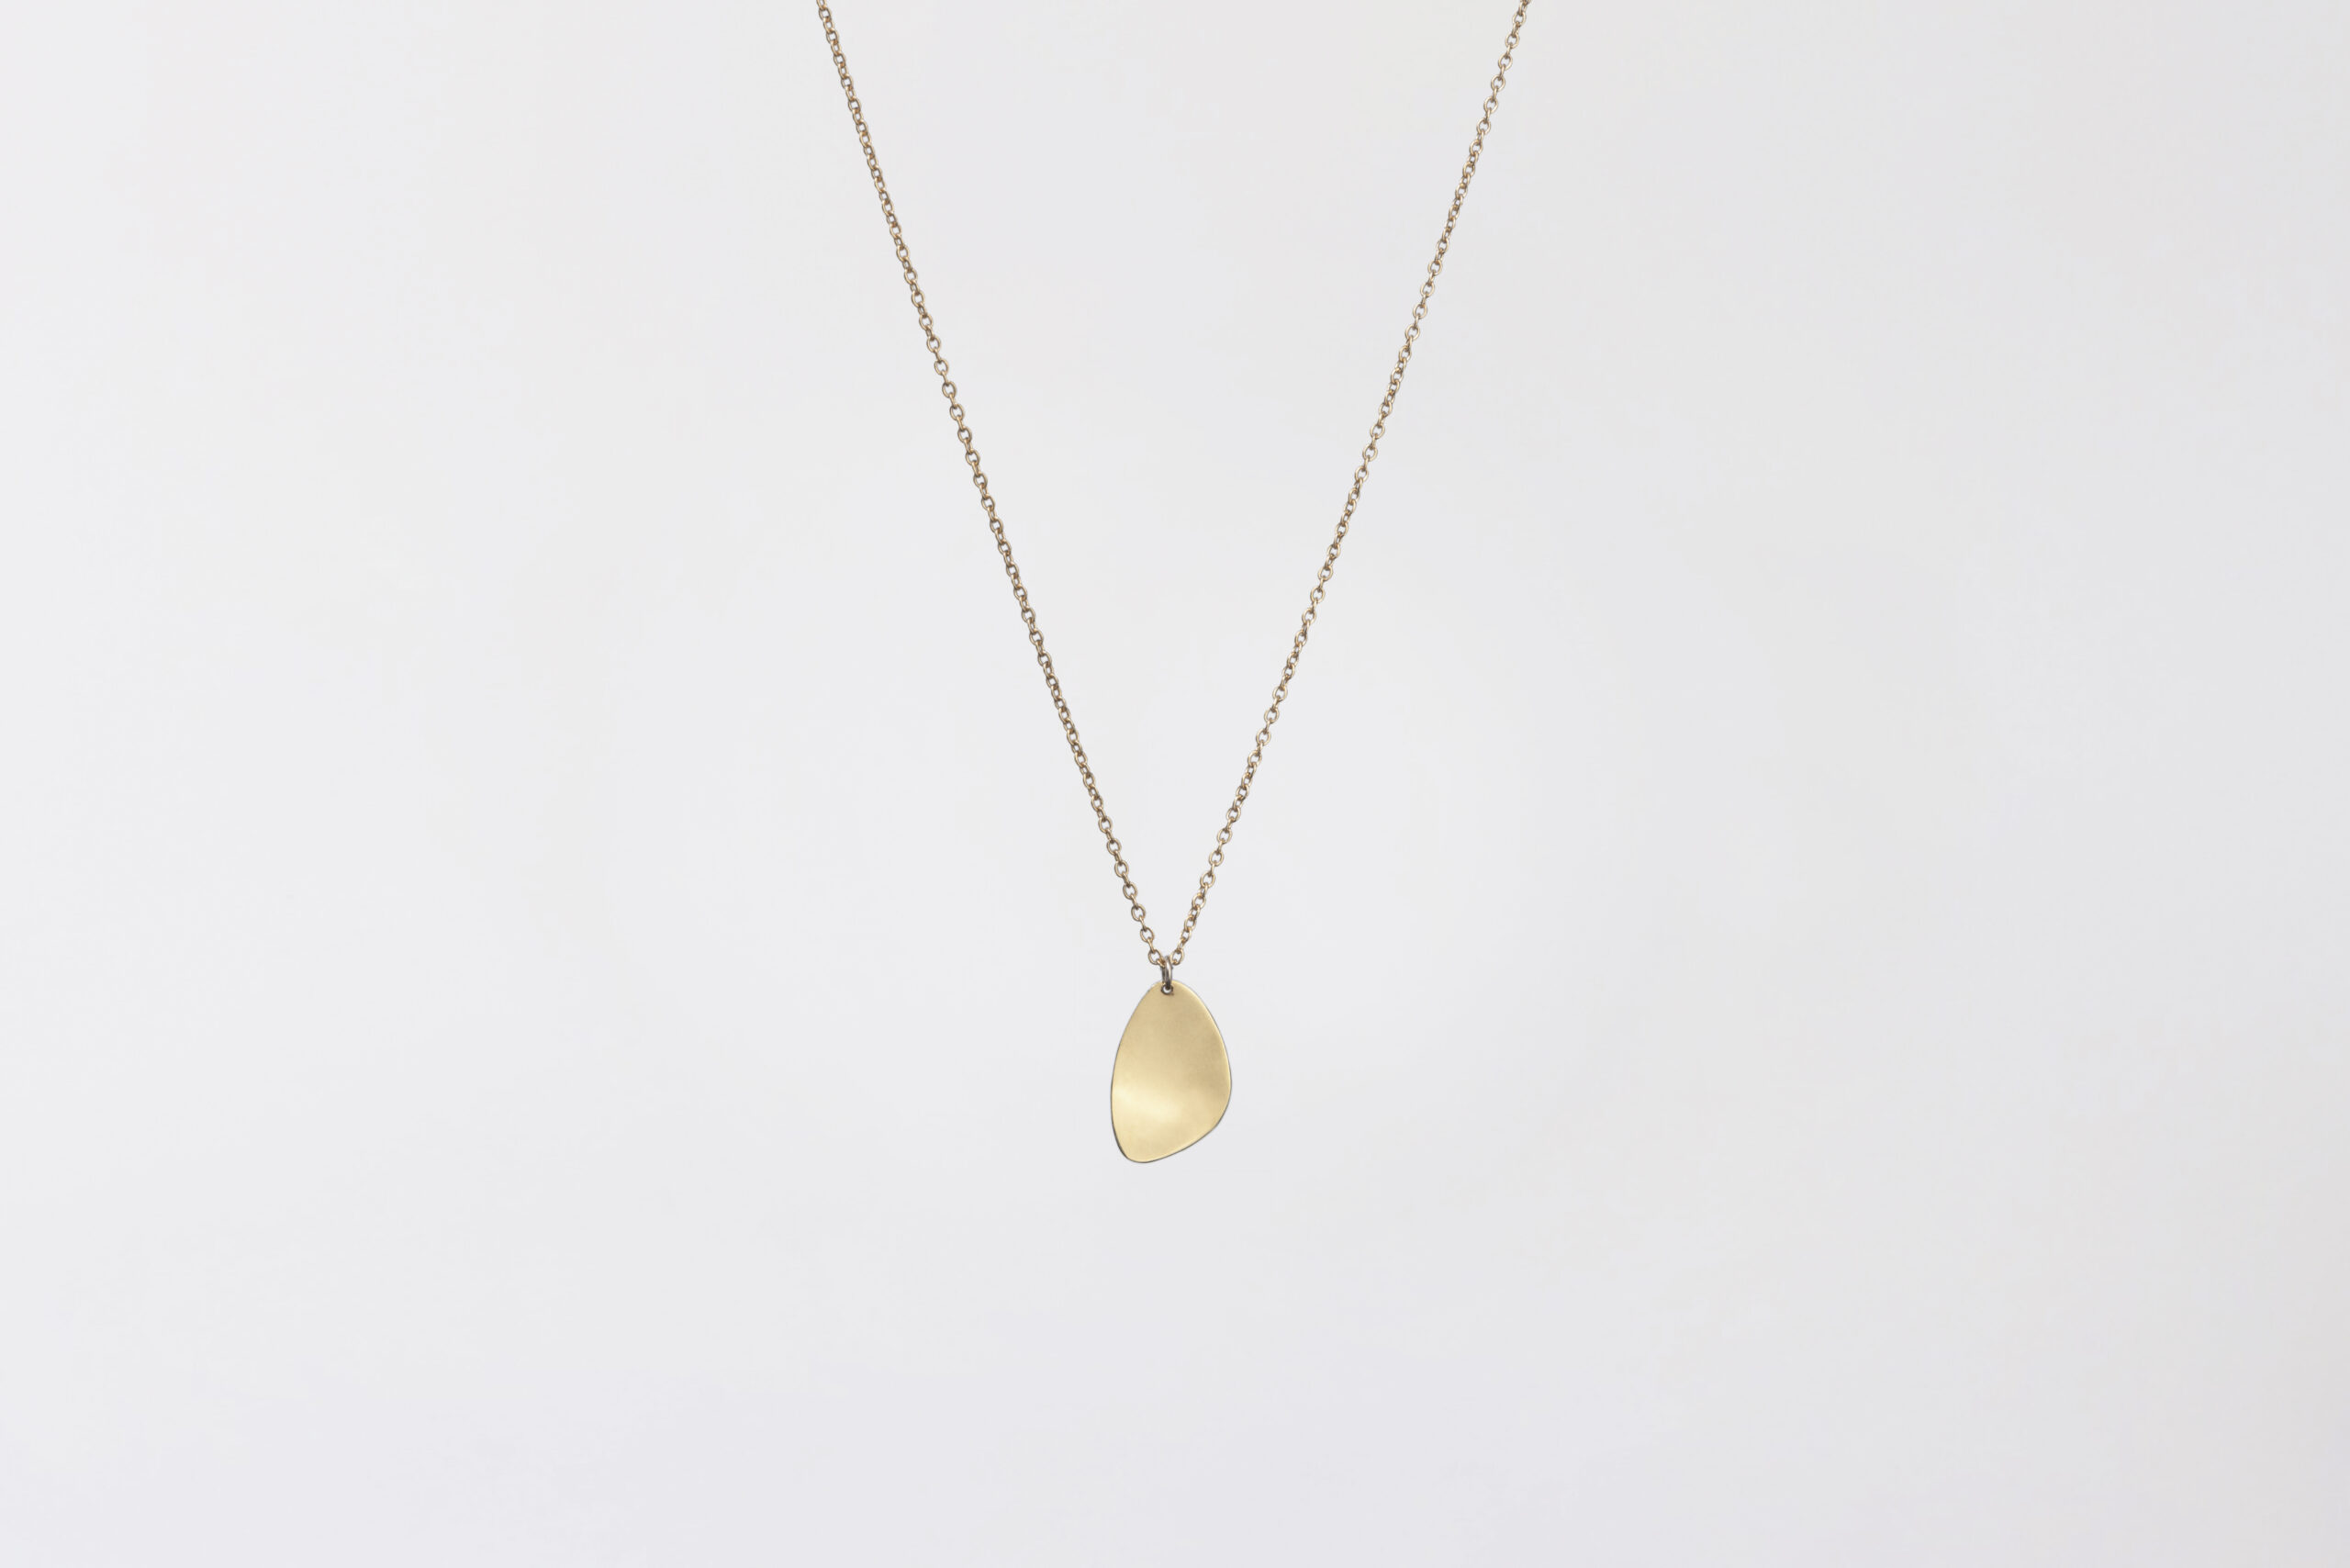 Ethical sustainable Singö necklace with matte 14K gold plating